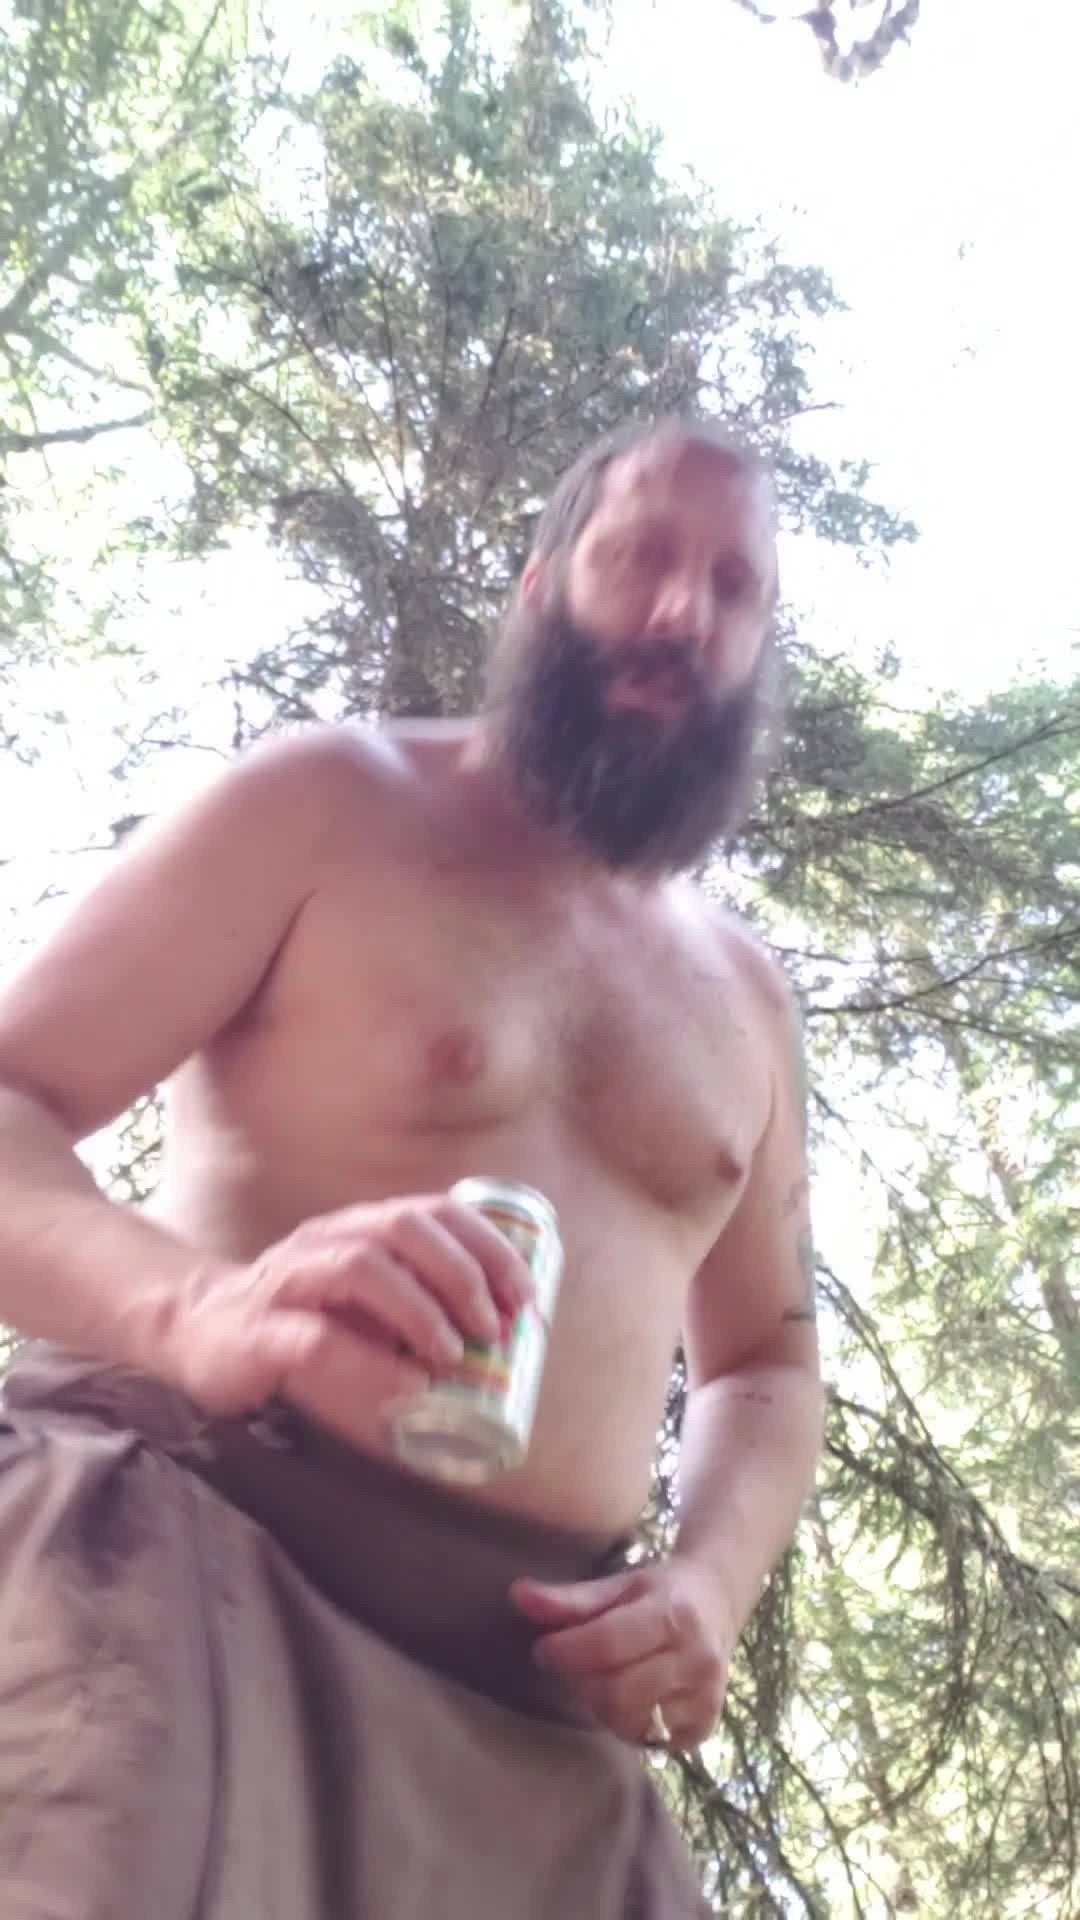 Beer and piss in the woods